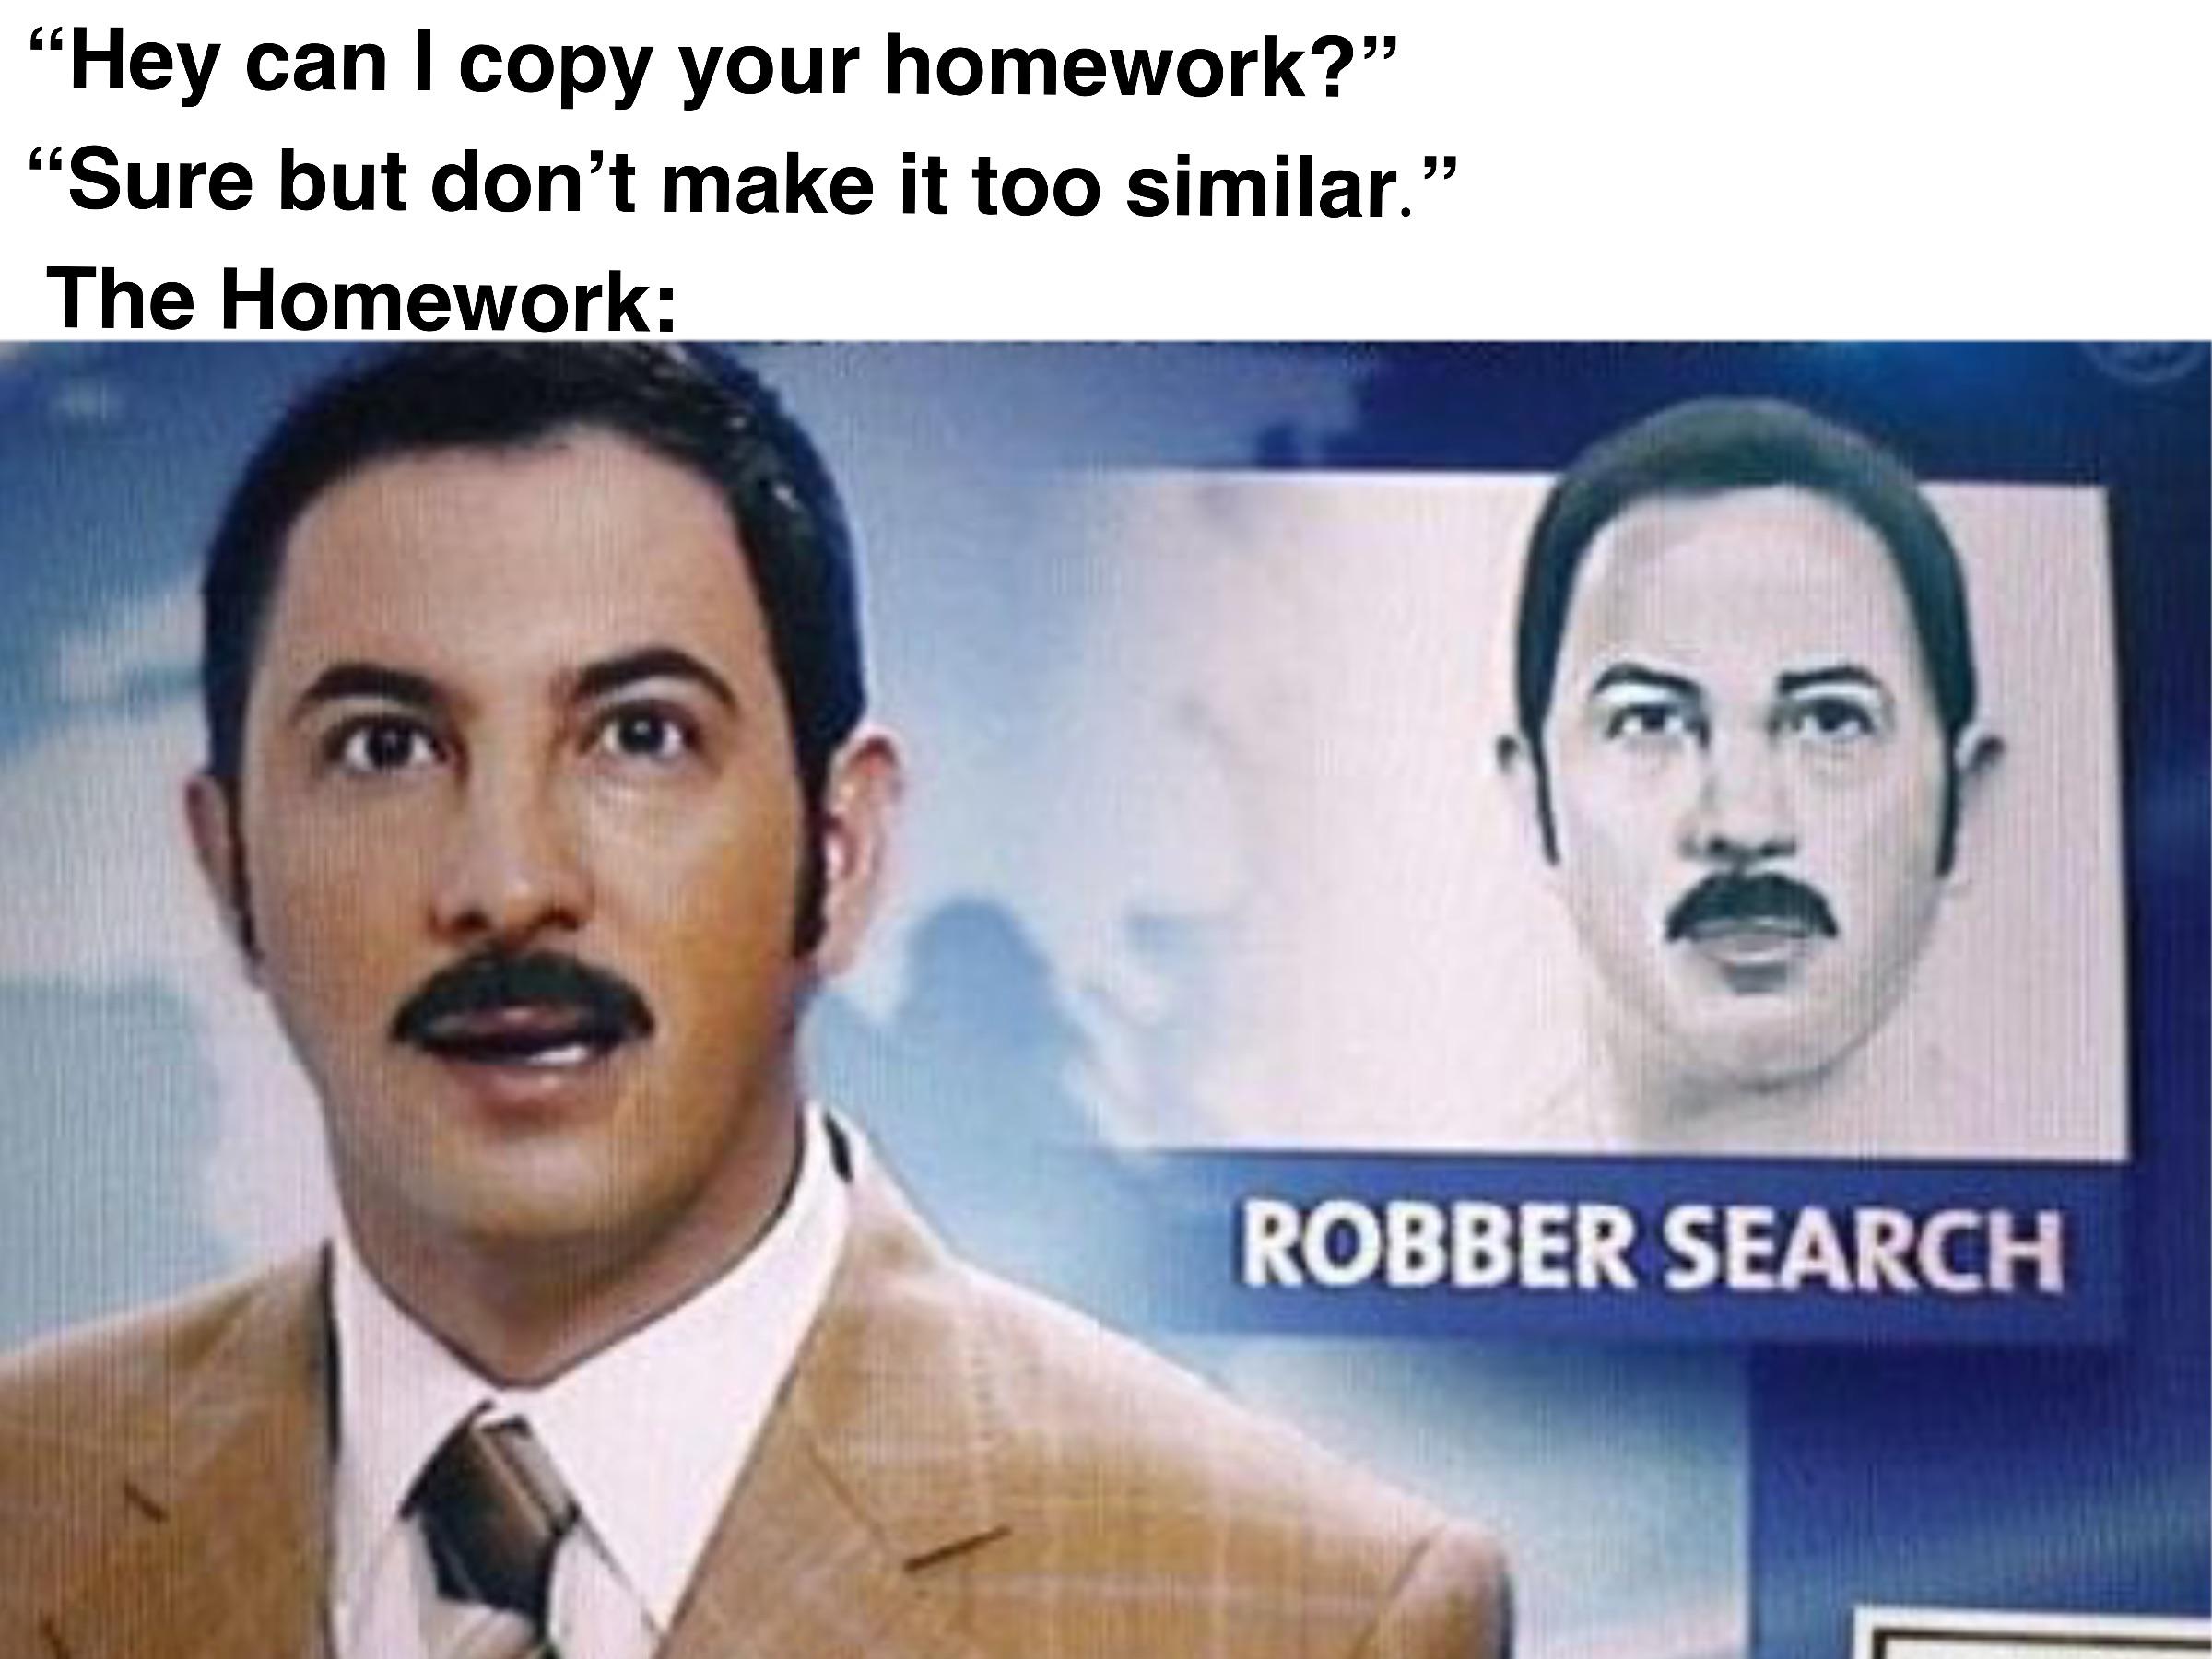 robber search meme - "Hey can I copy your homework? "Sure but don't make it too similar." The Homework Robber Search